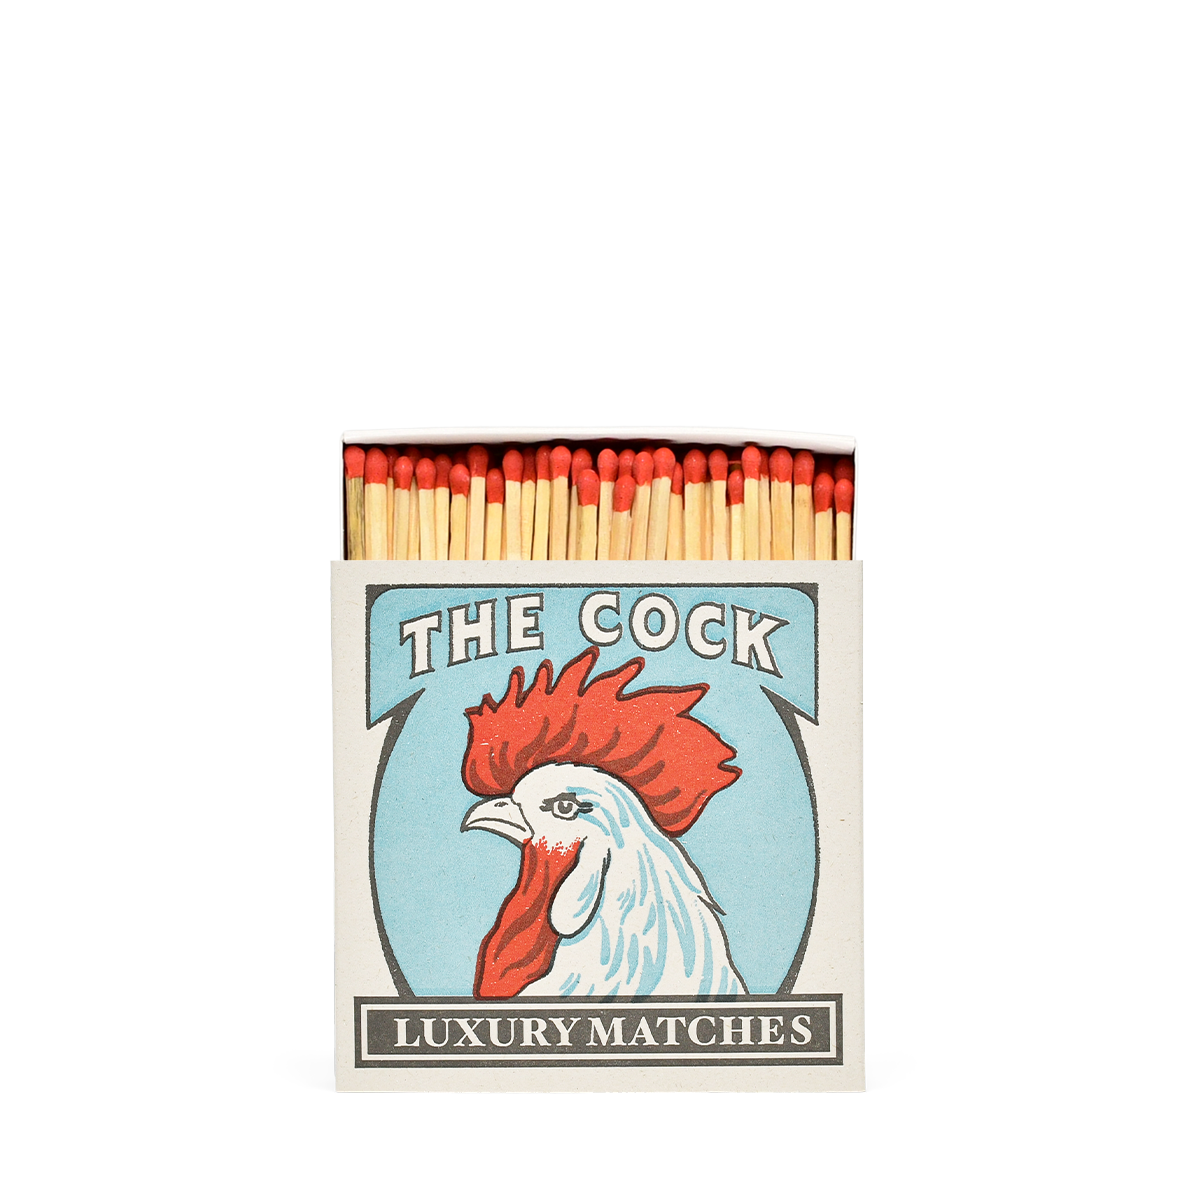 ARCHIVIST GALLERY - MATCHBOX - THE COCK